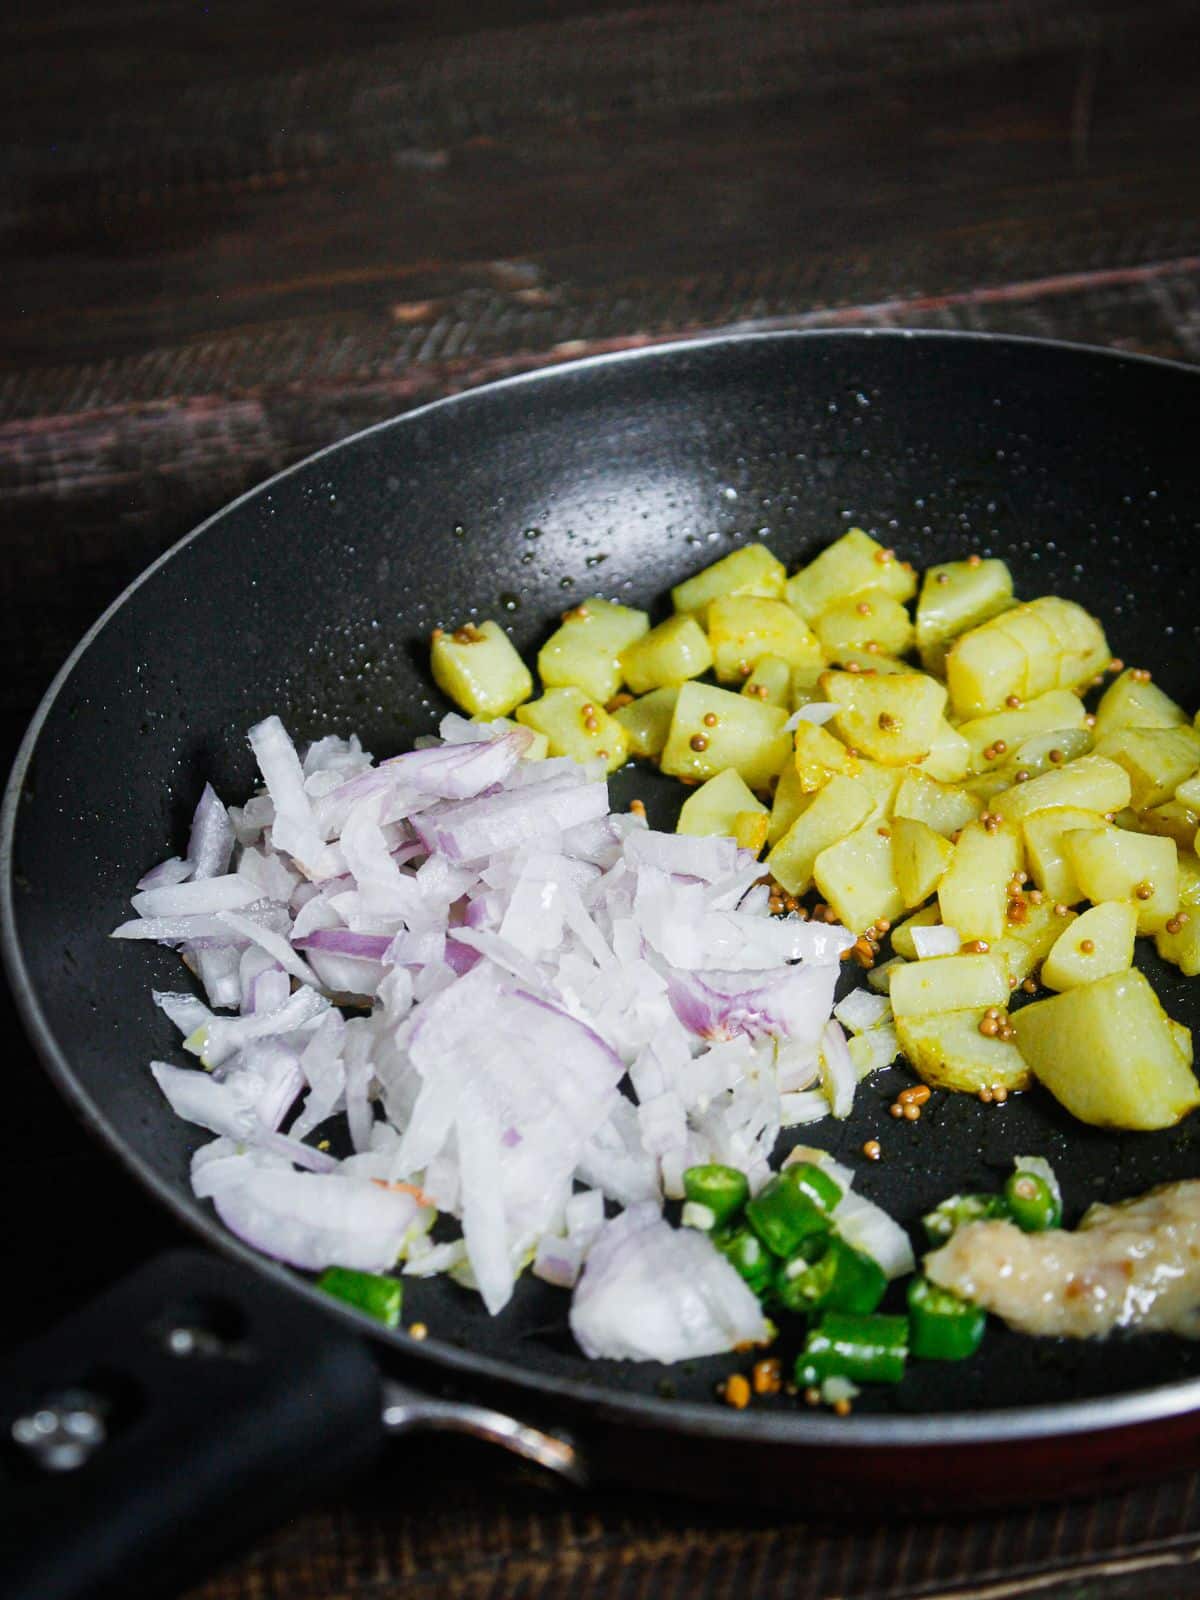 Add chopped onions, green chilies and ginger garlic paste to the pan and mix well